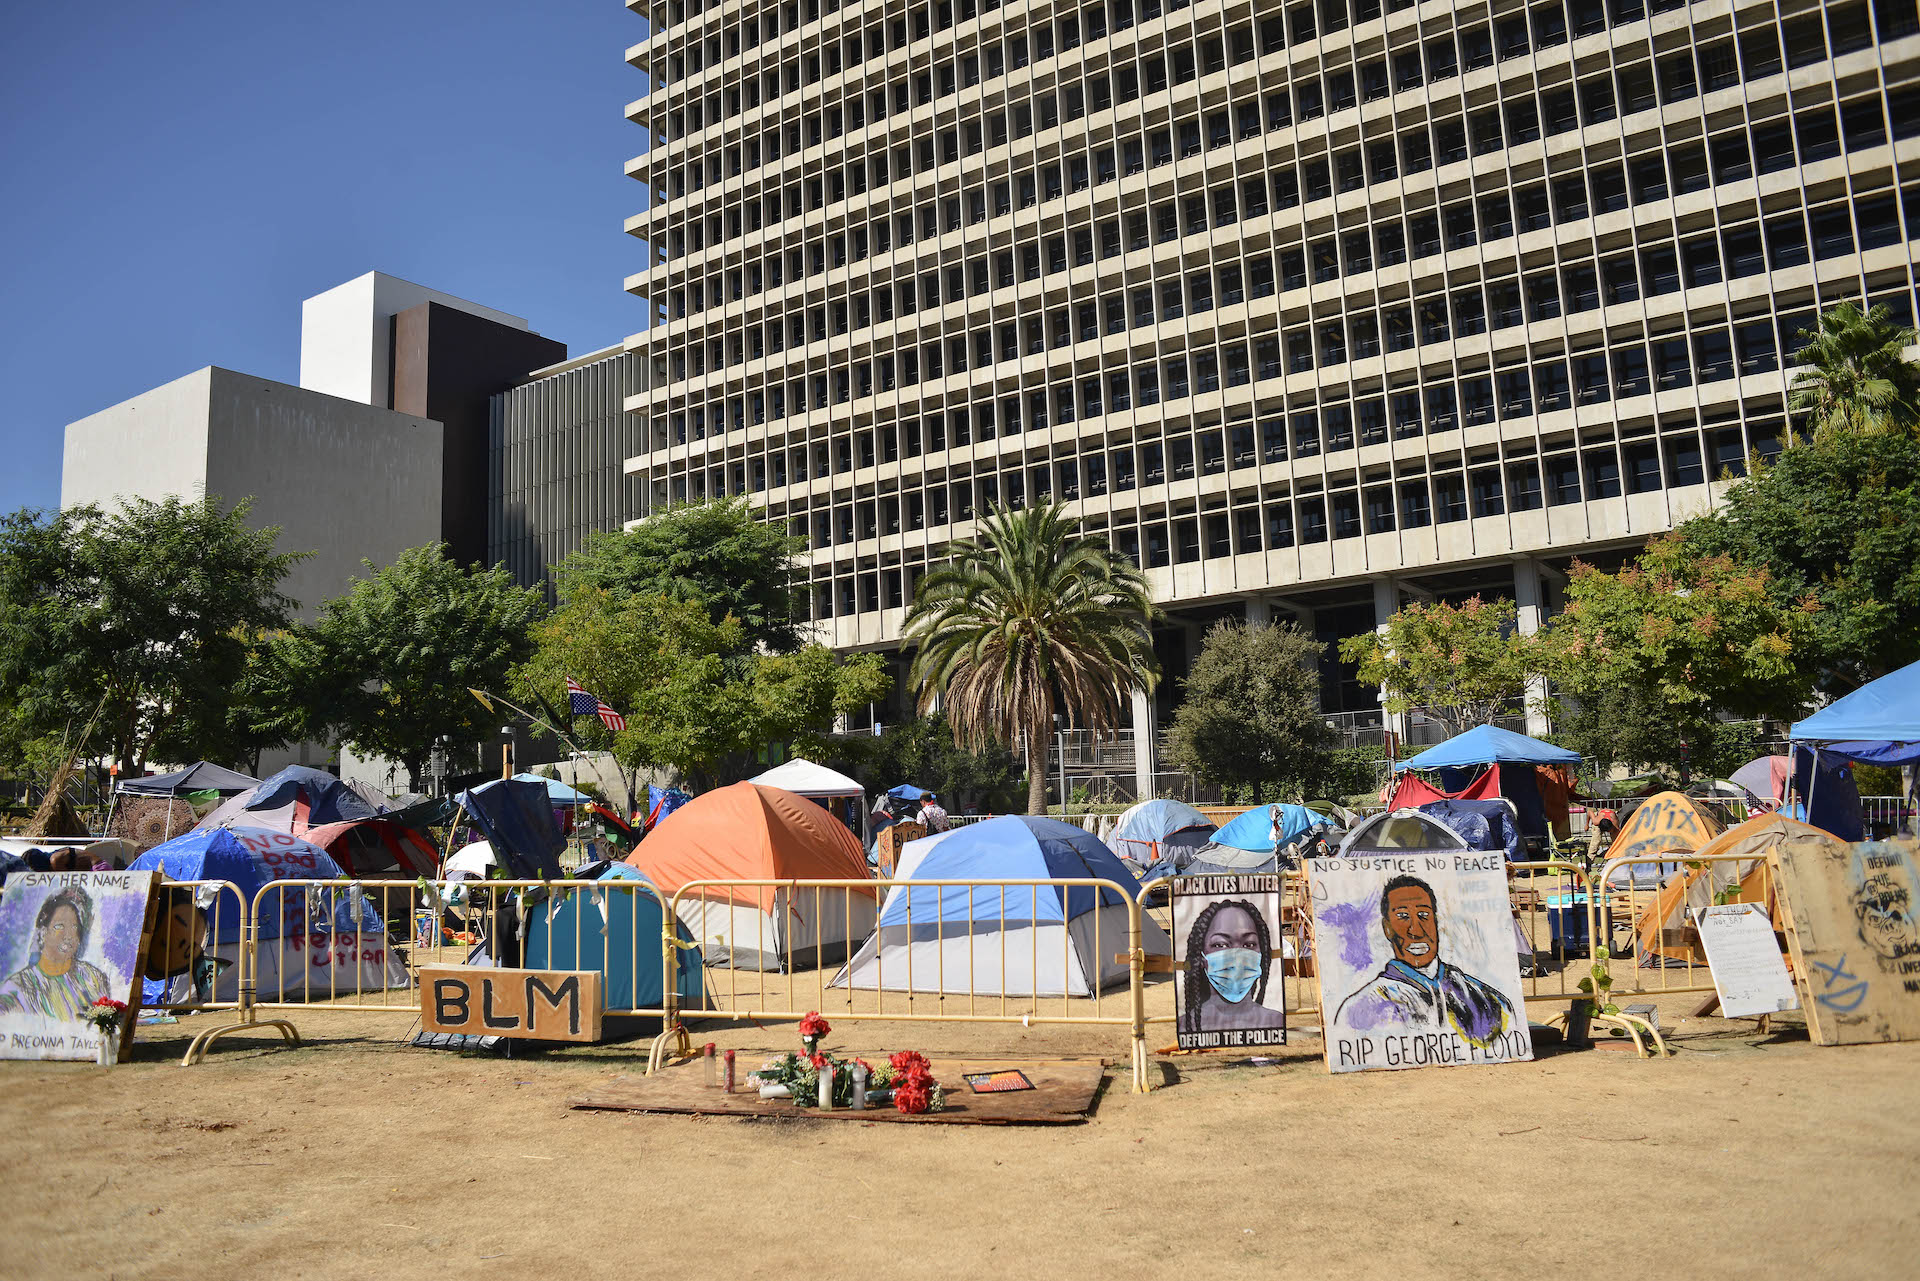 A photo of an encampment in front of L.A. City Hall.